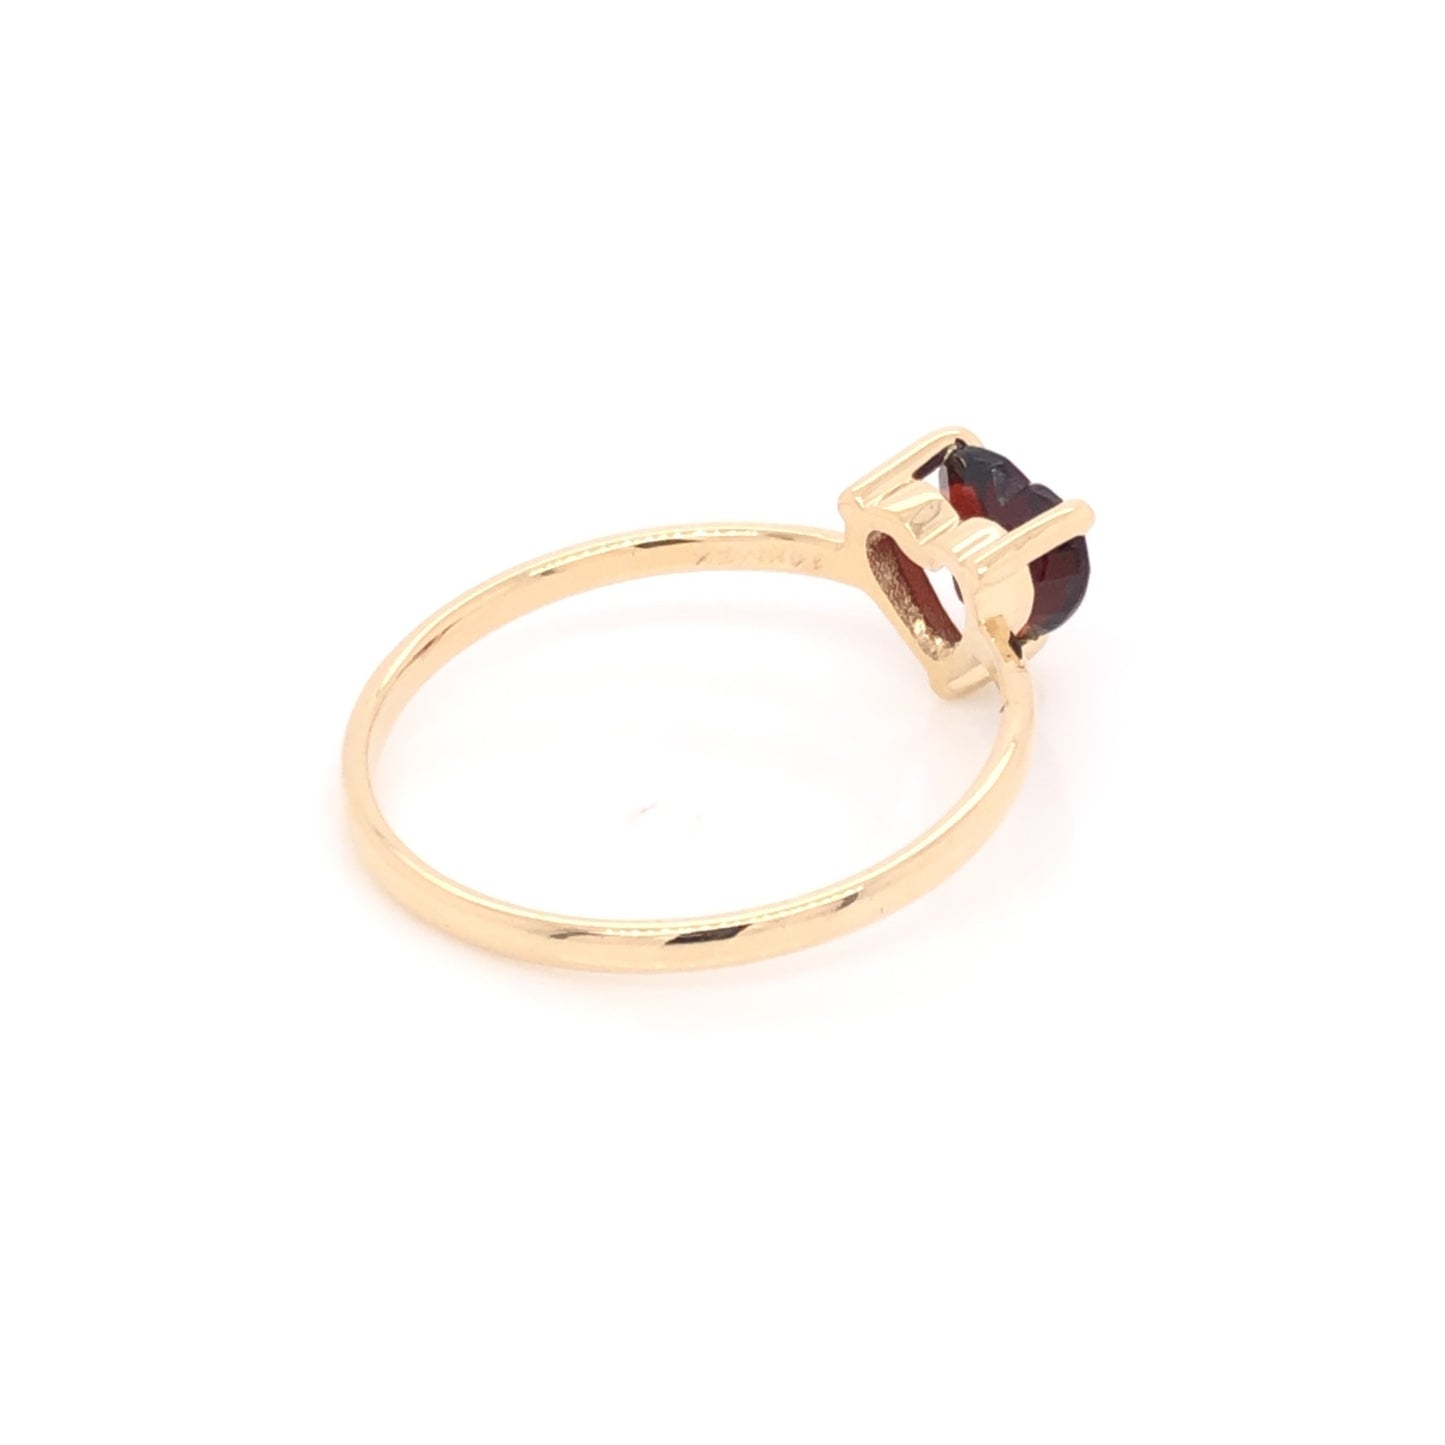 IMMEDIATE DELIVERY / Garnet Heart Ring / 14k Yellow Gold / Size 5.5